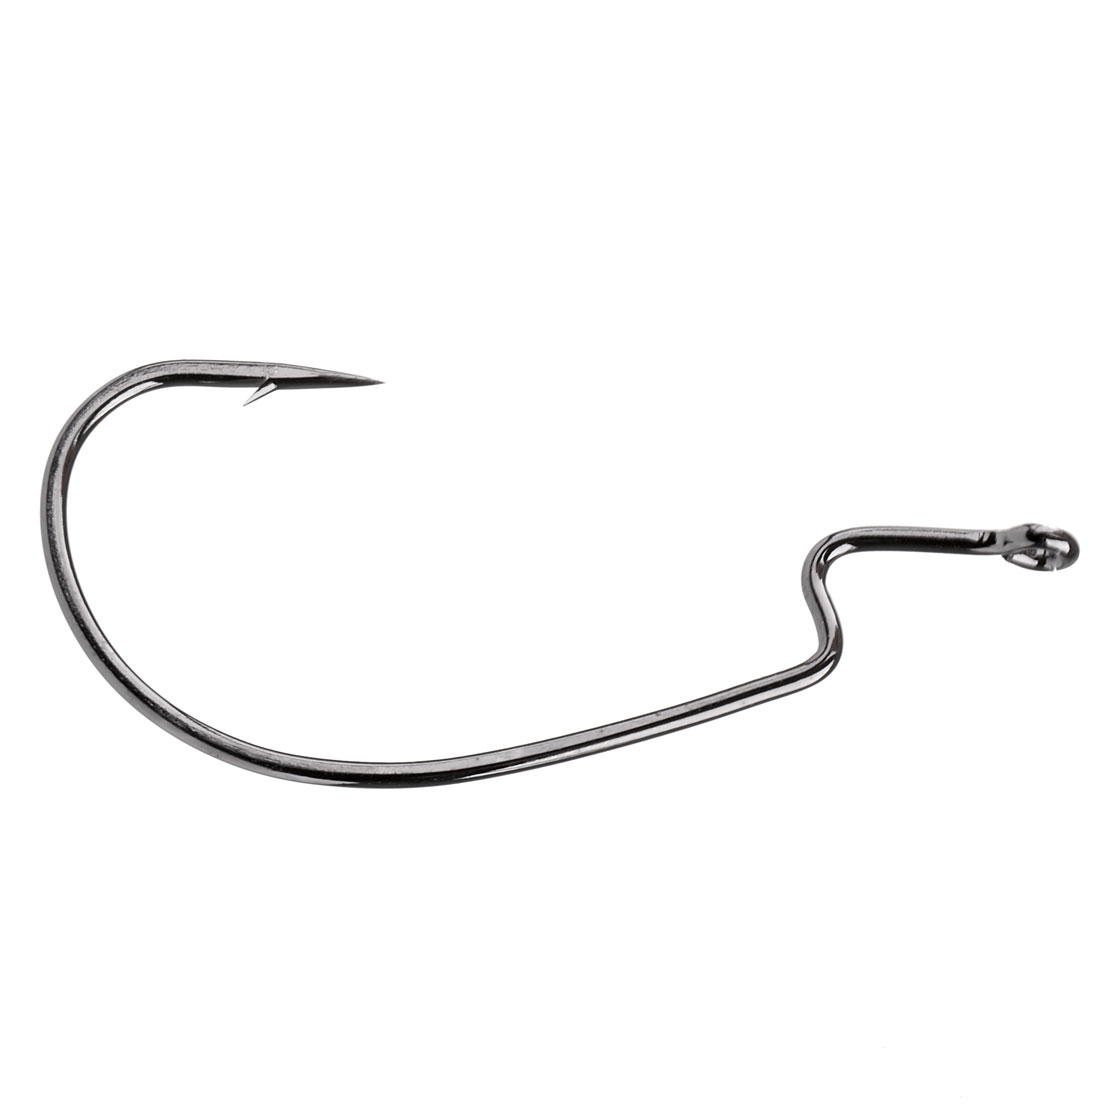 Ryugi LT Offset Extra Wide Gap, Hooks, Accessories, Spin Fishing